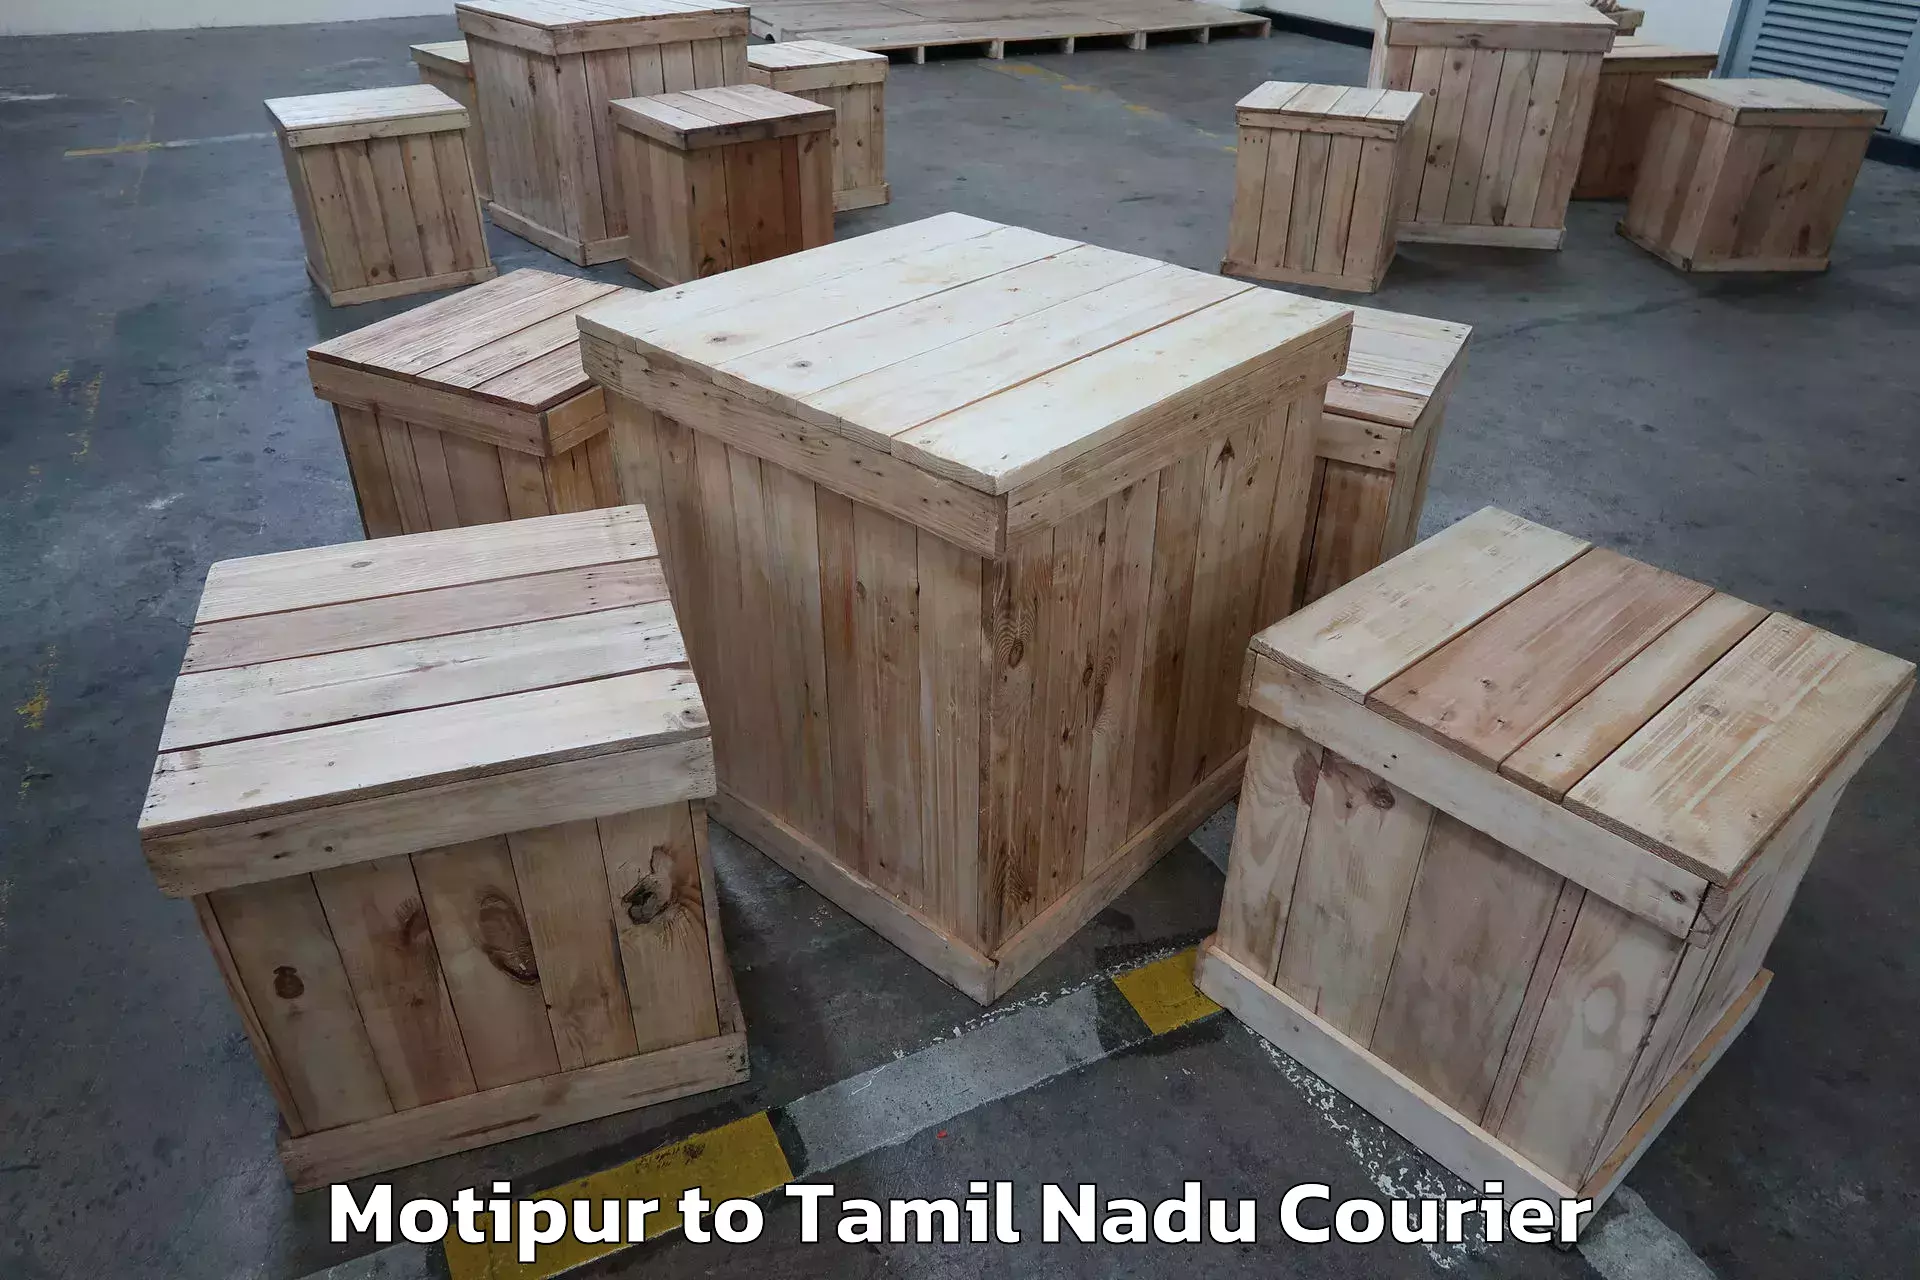 Professional moving assistance Motipur to Tuticorin Port